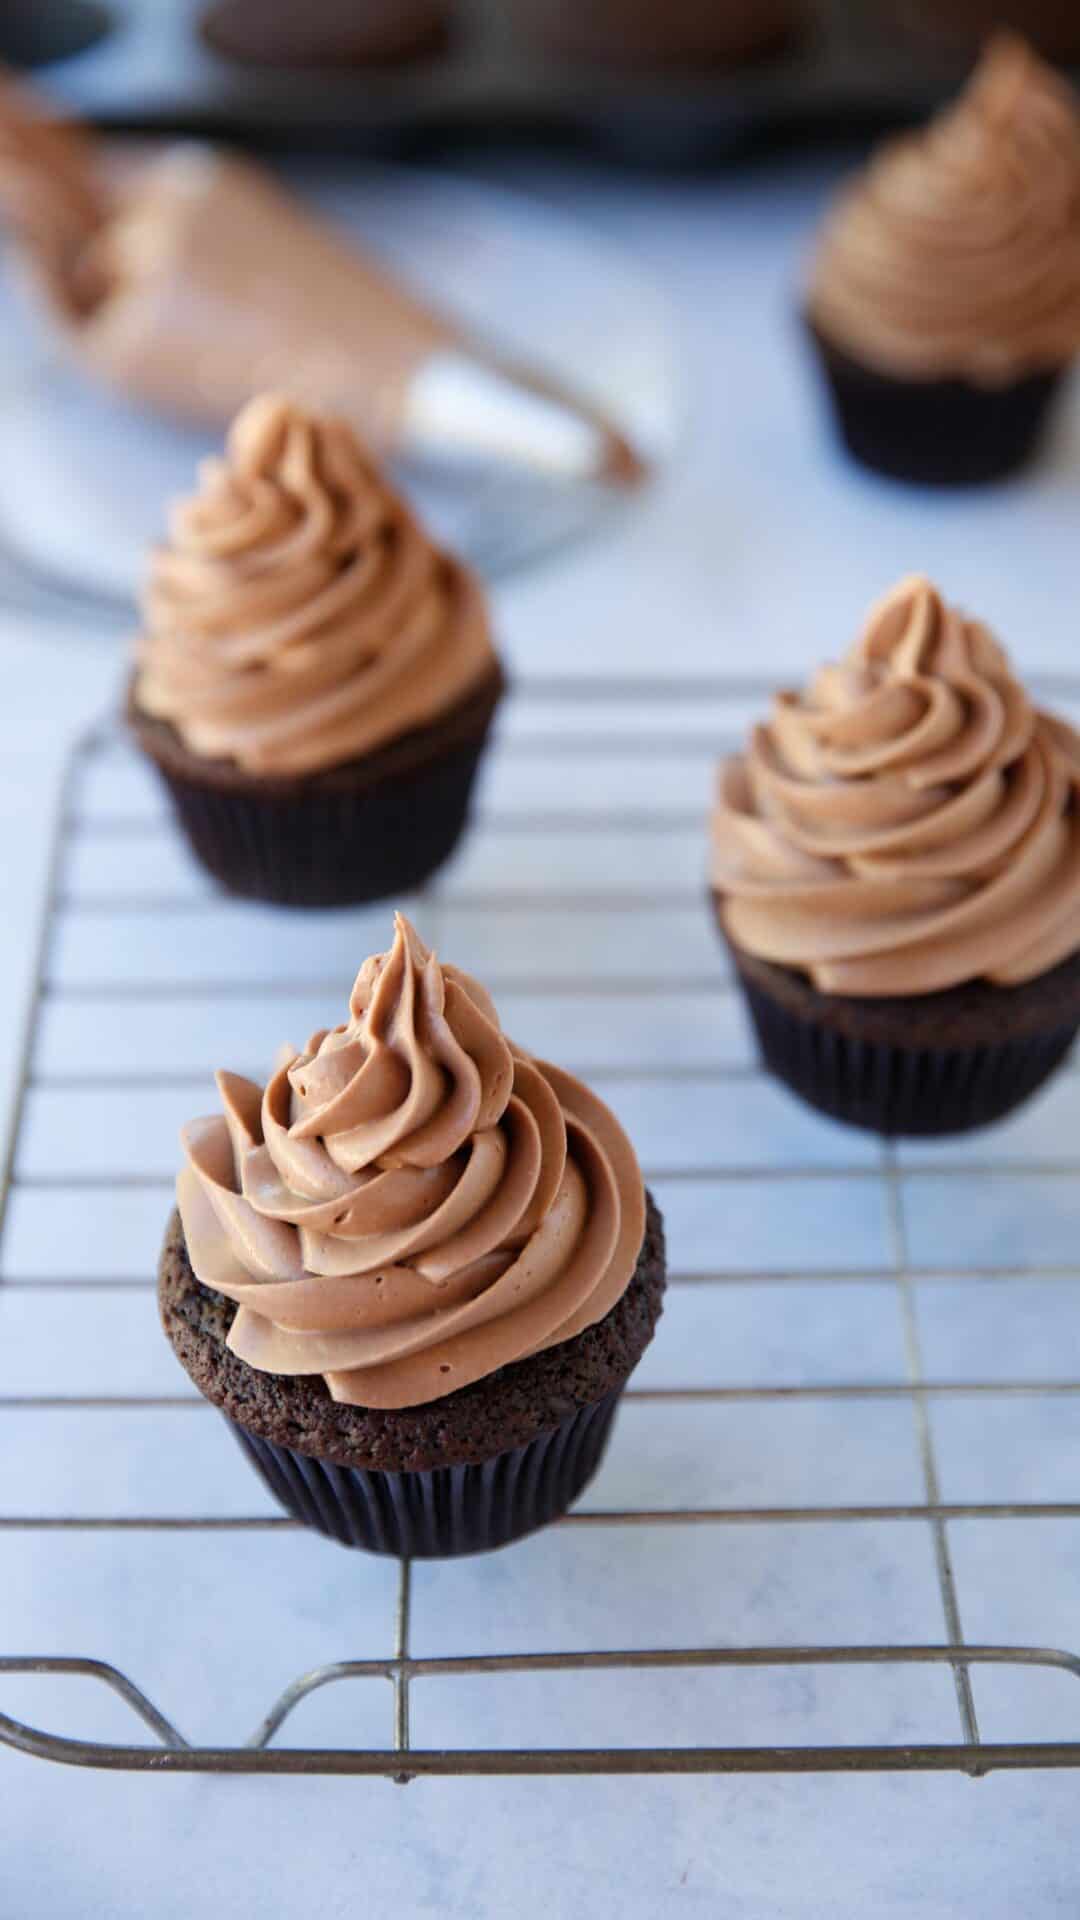 Chocolate cupcakes being frosted with chocolate frosting on a cooling rack